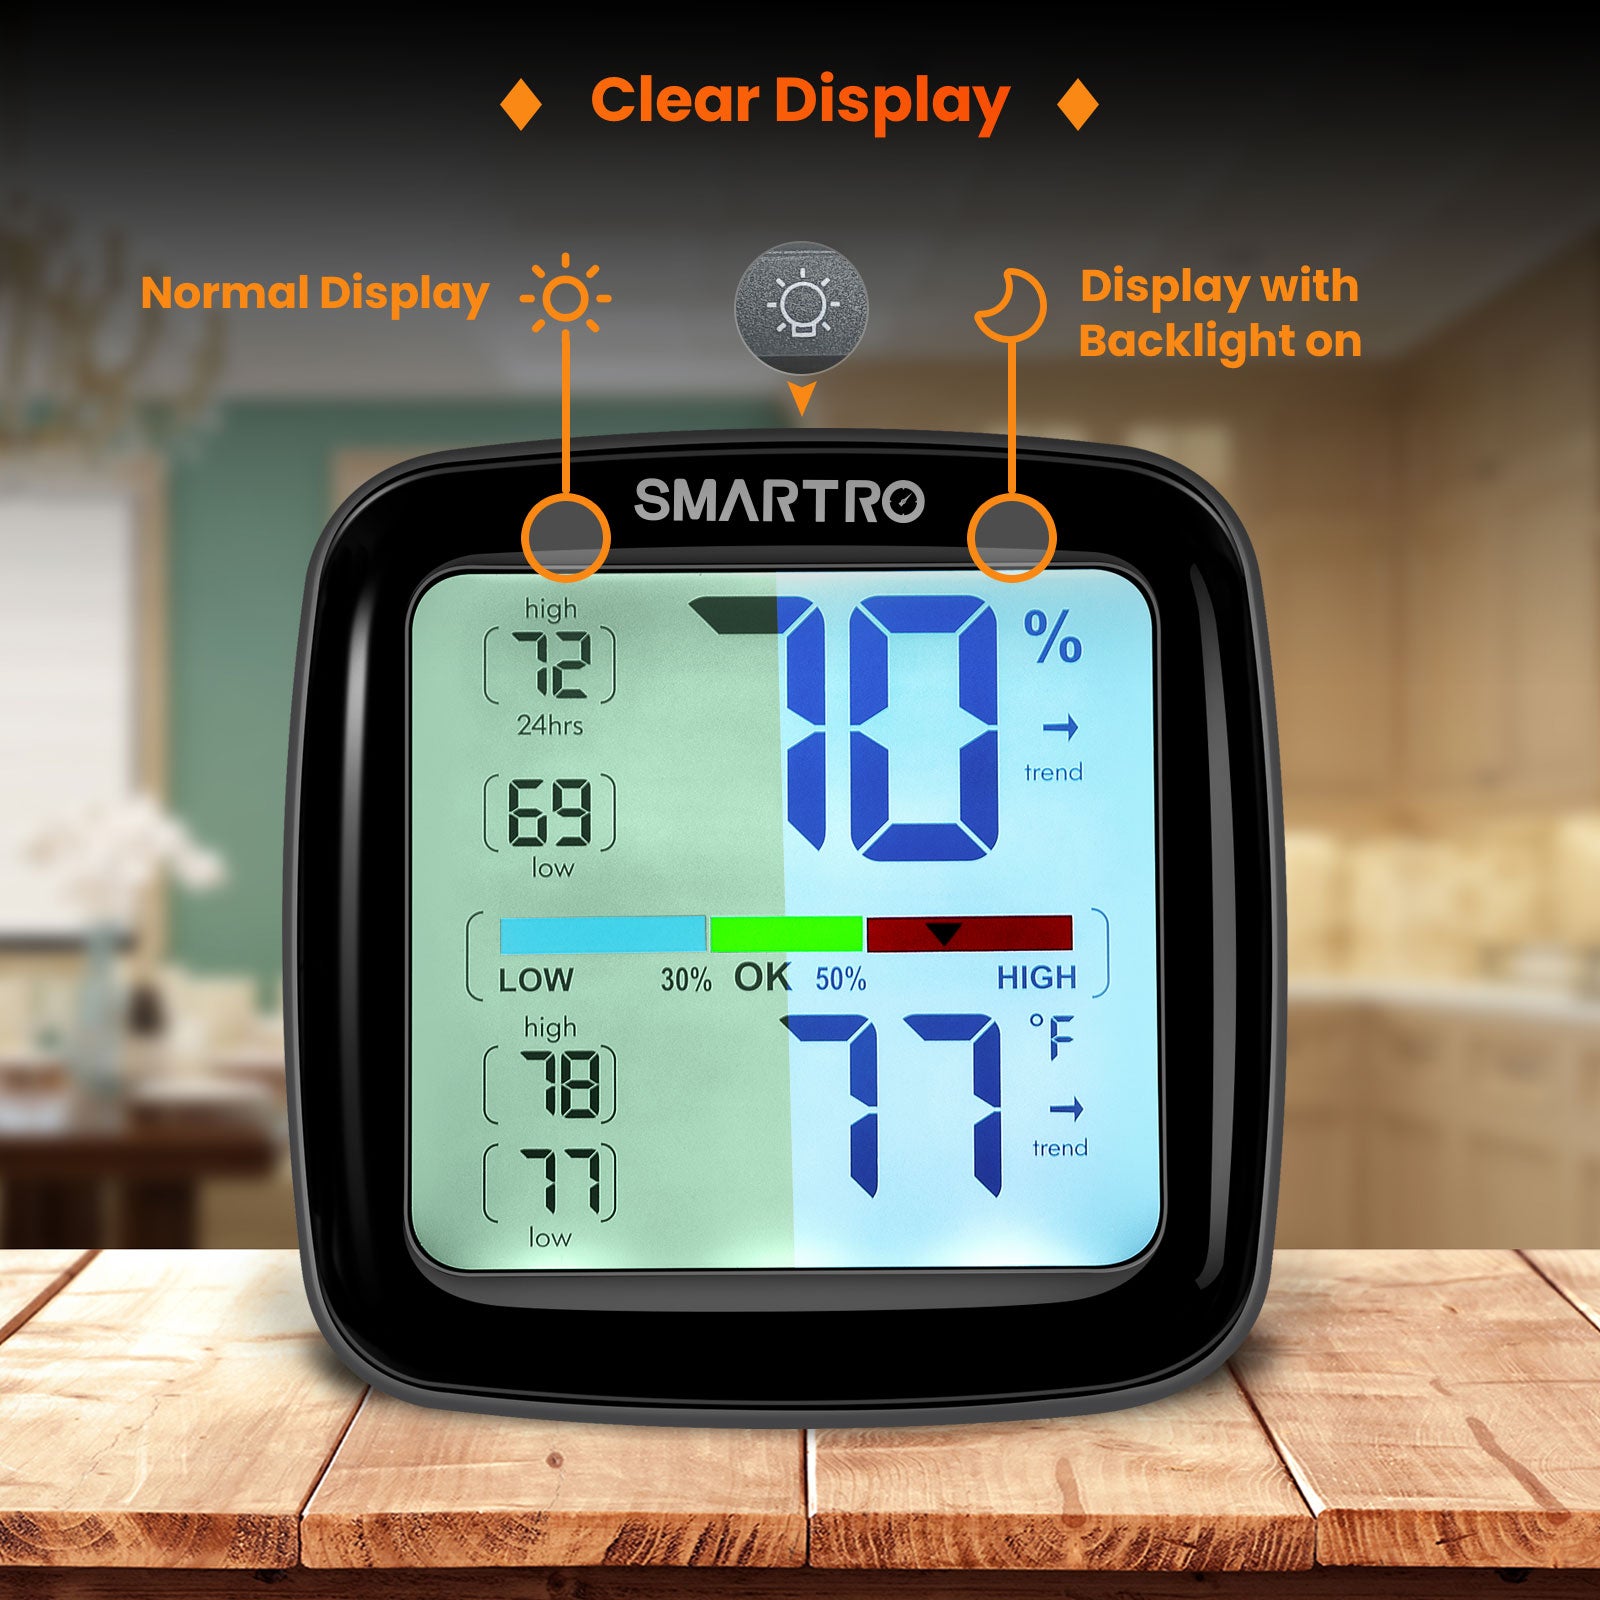 Digital Hygrometer Indoor Thermometer Room Thermometer and